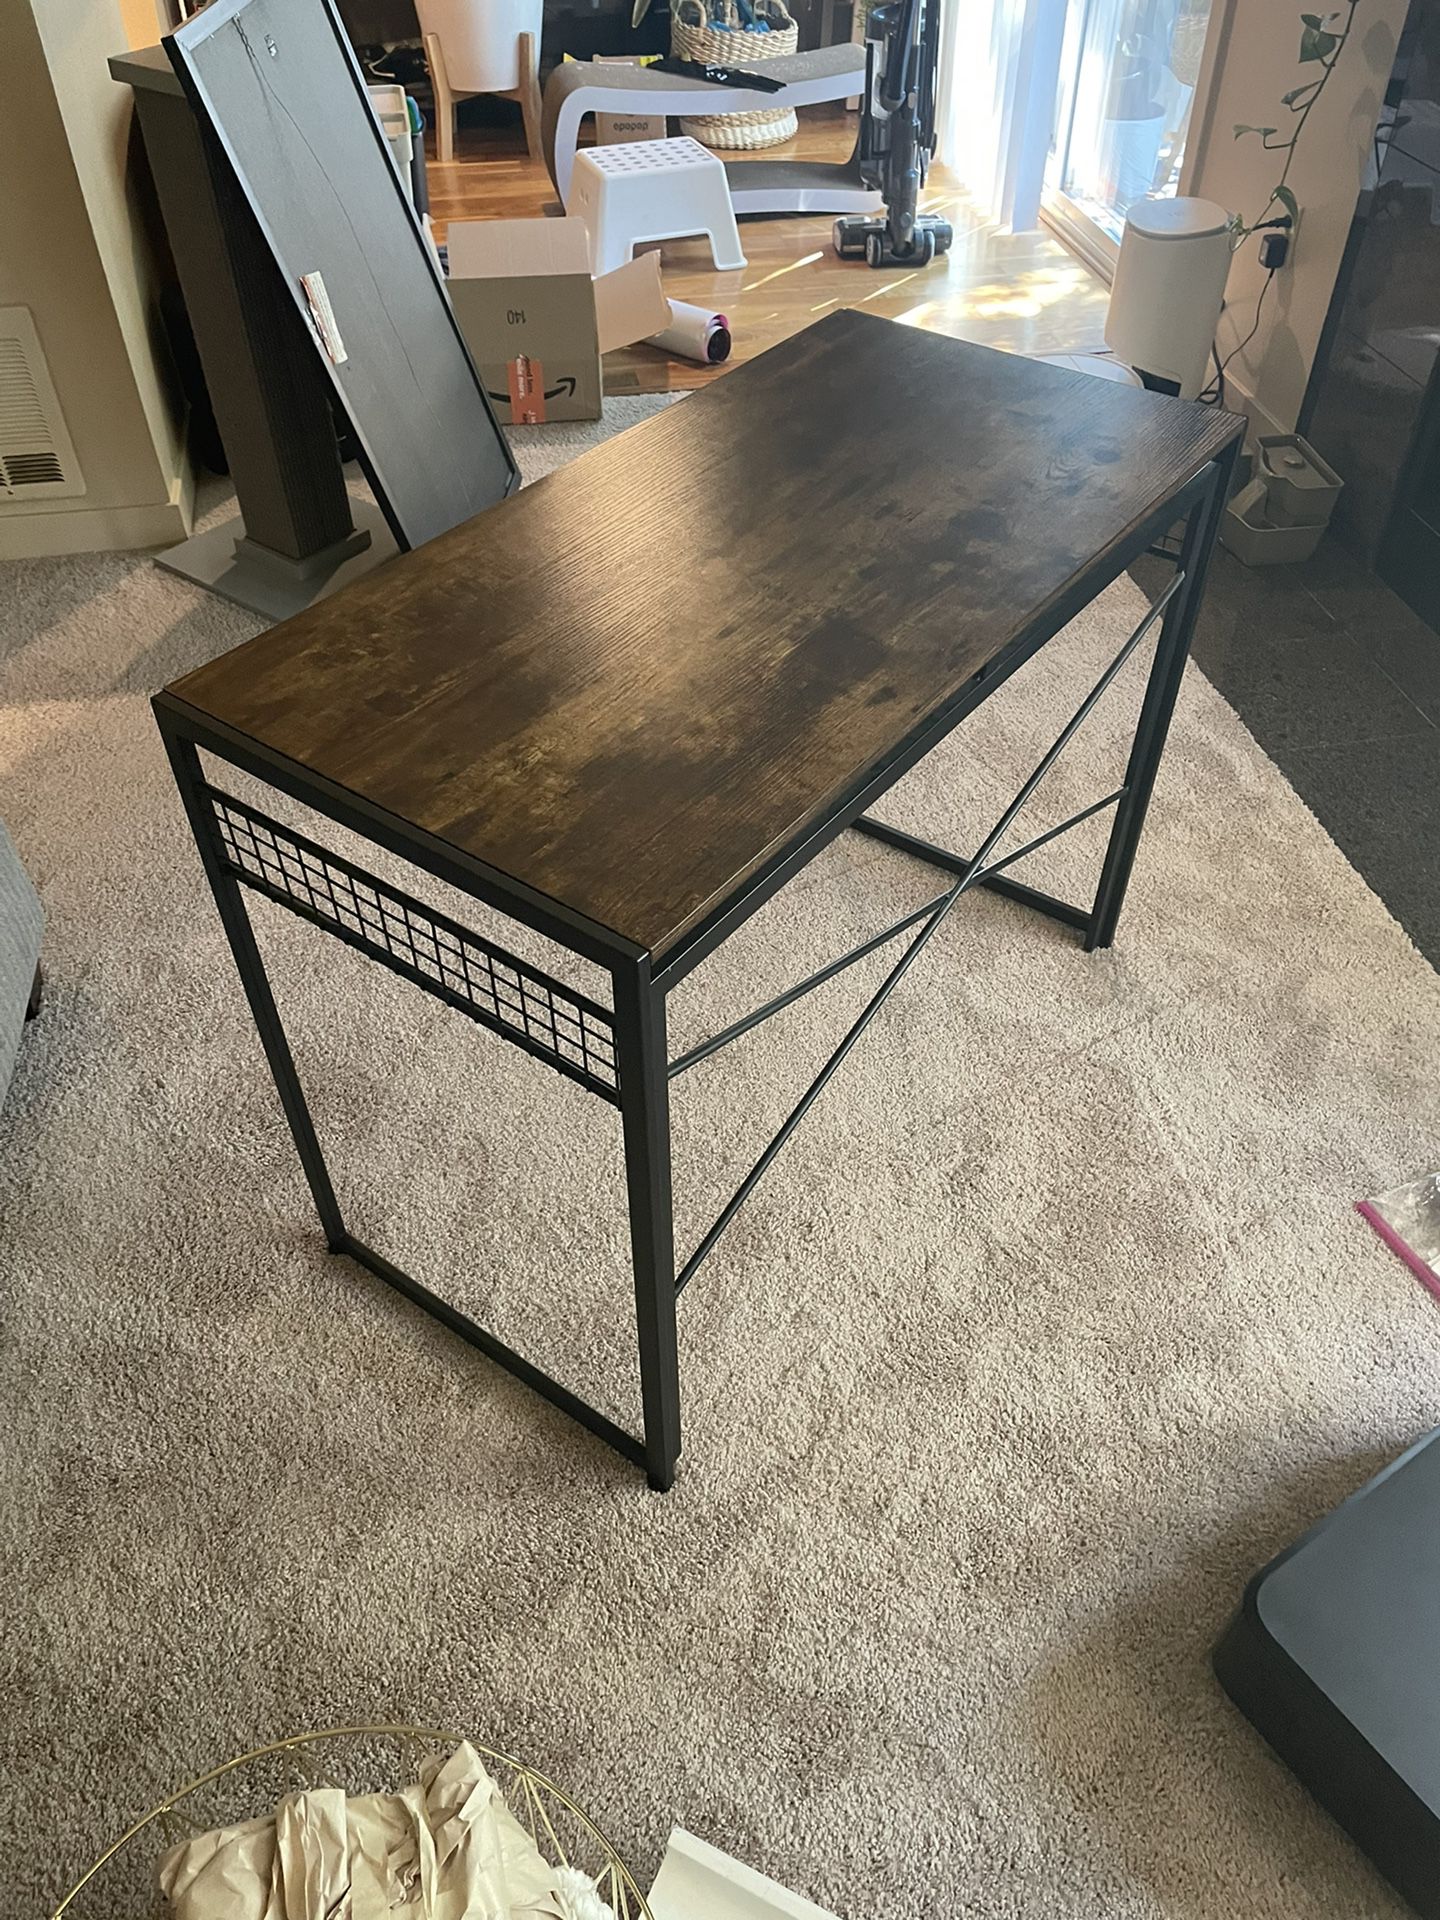 Collapsible Desk